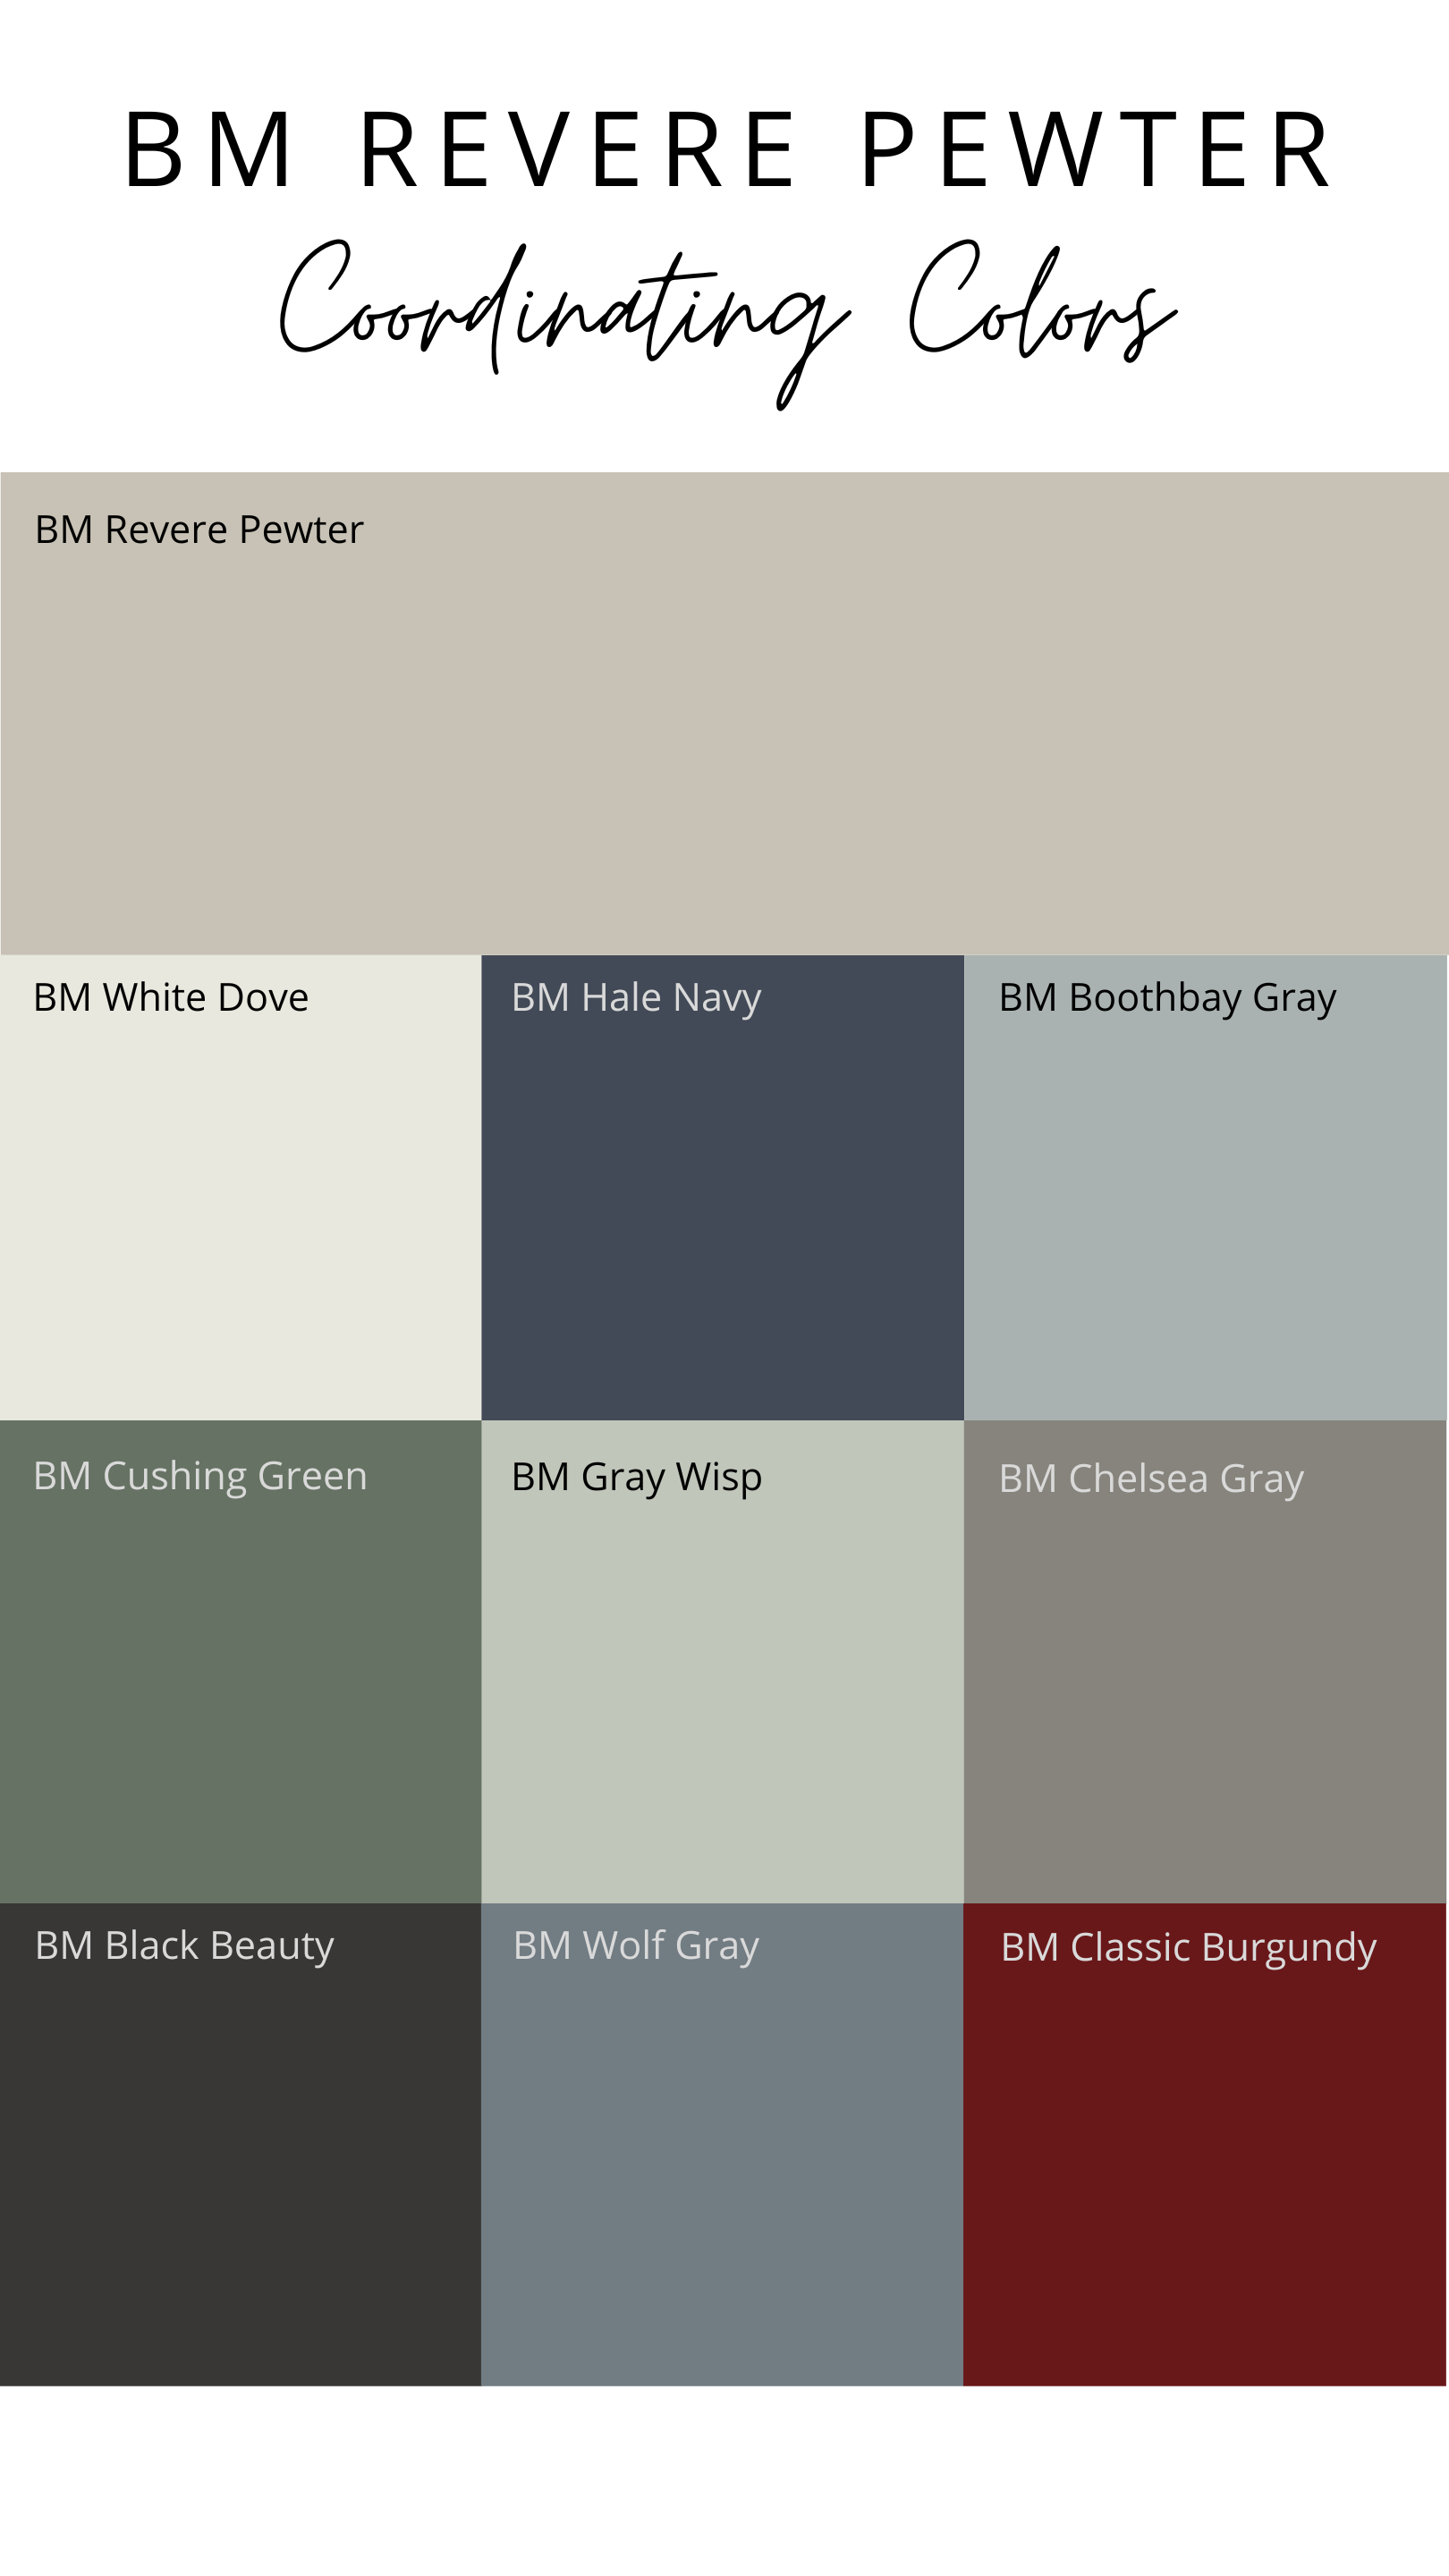 revere pewter coordinating colors